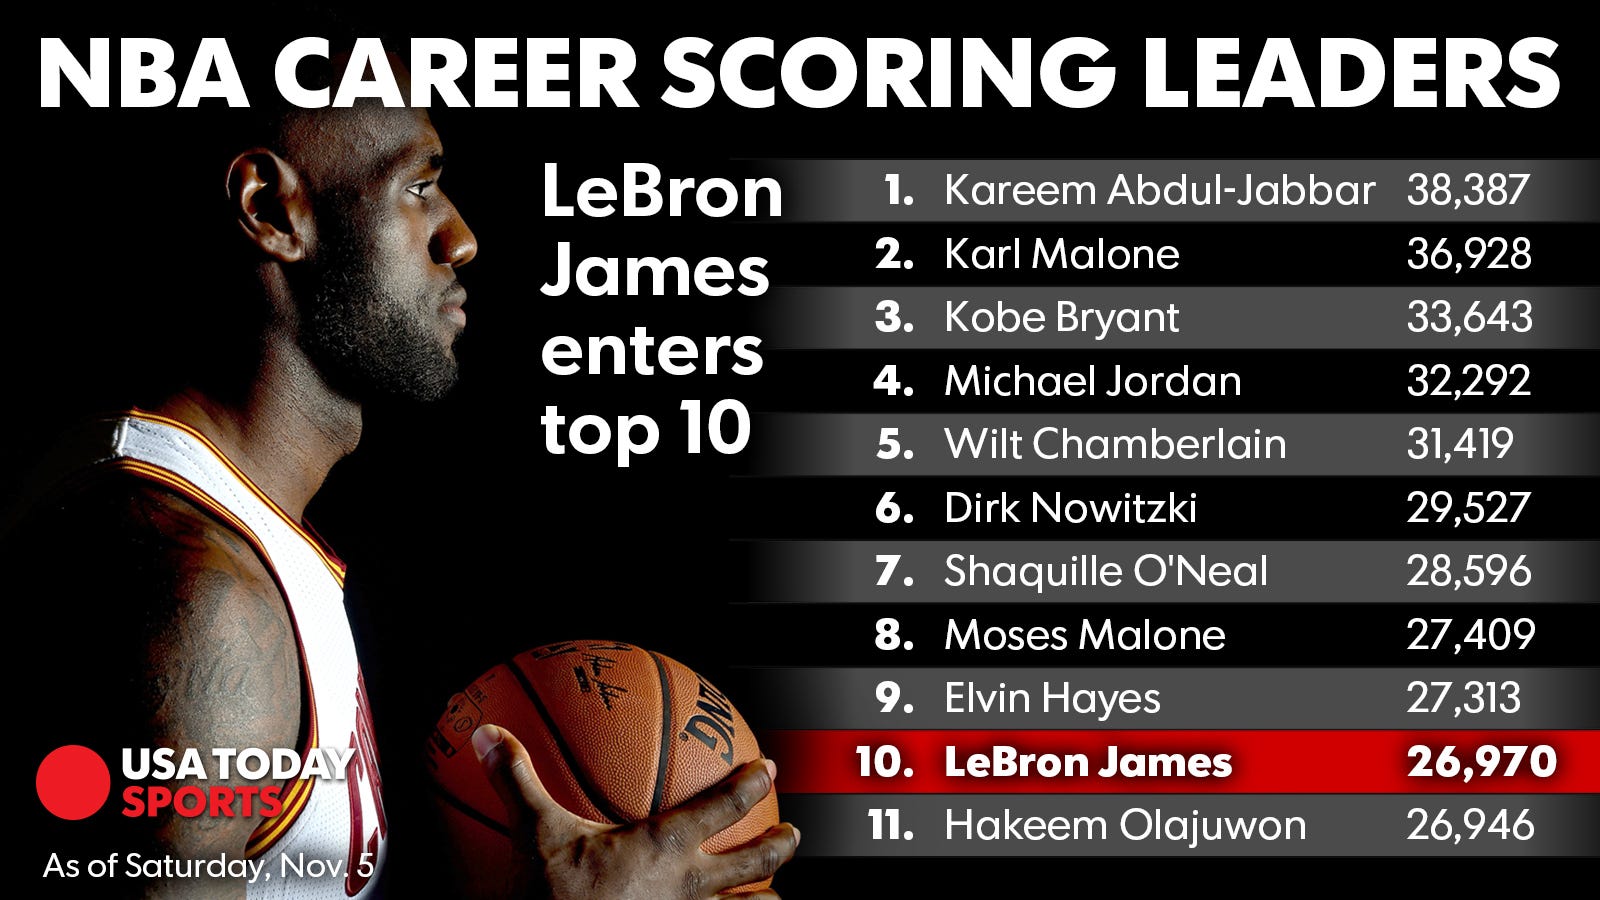 LeBron James becomes the all-time leading scorer in NBA history